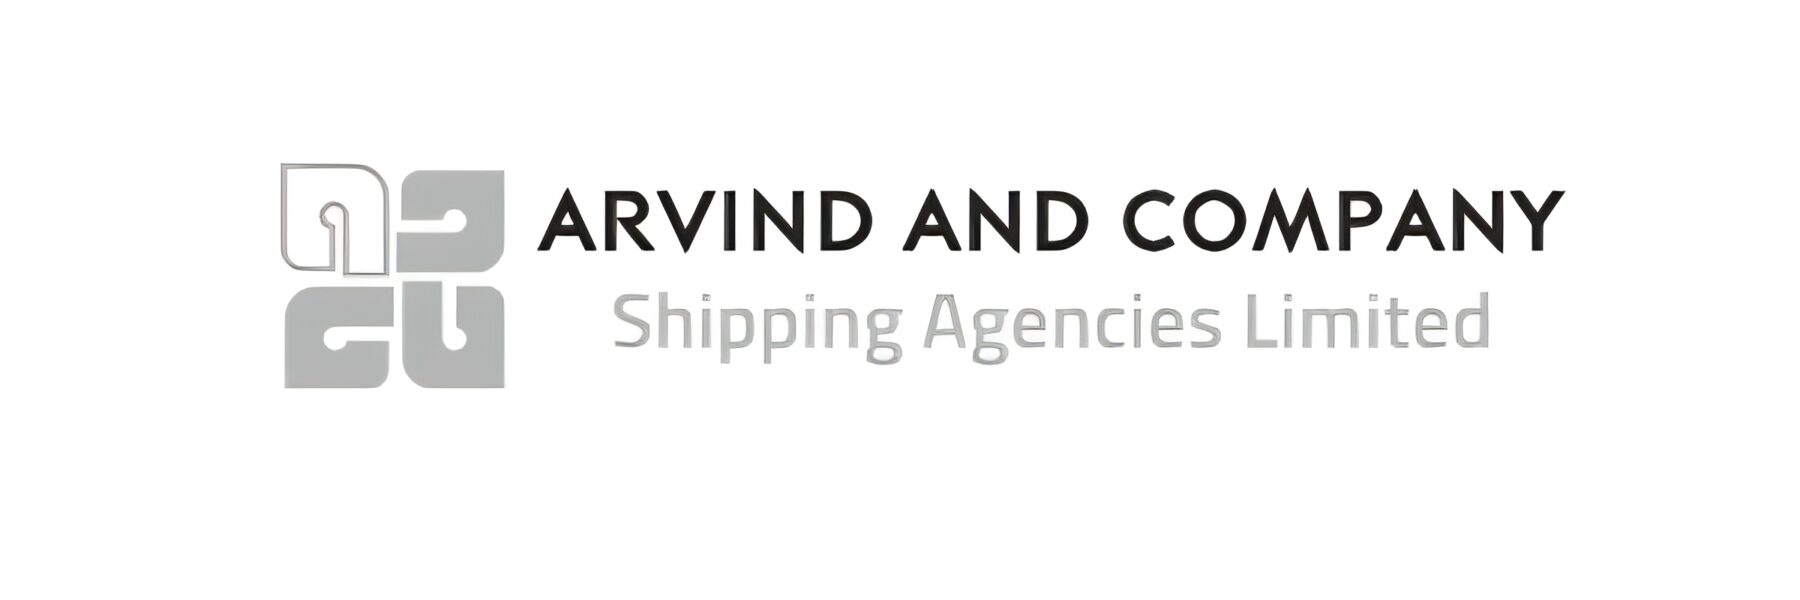 Arvind and Company Shipping Agencies IPO